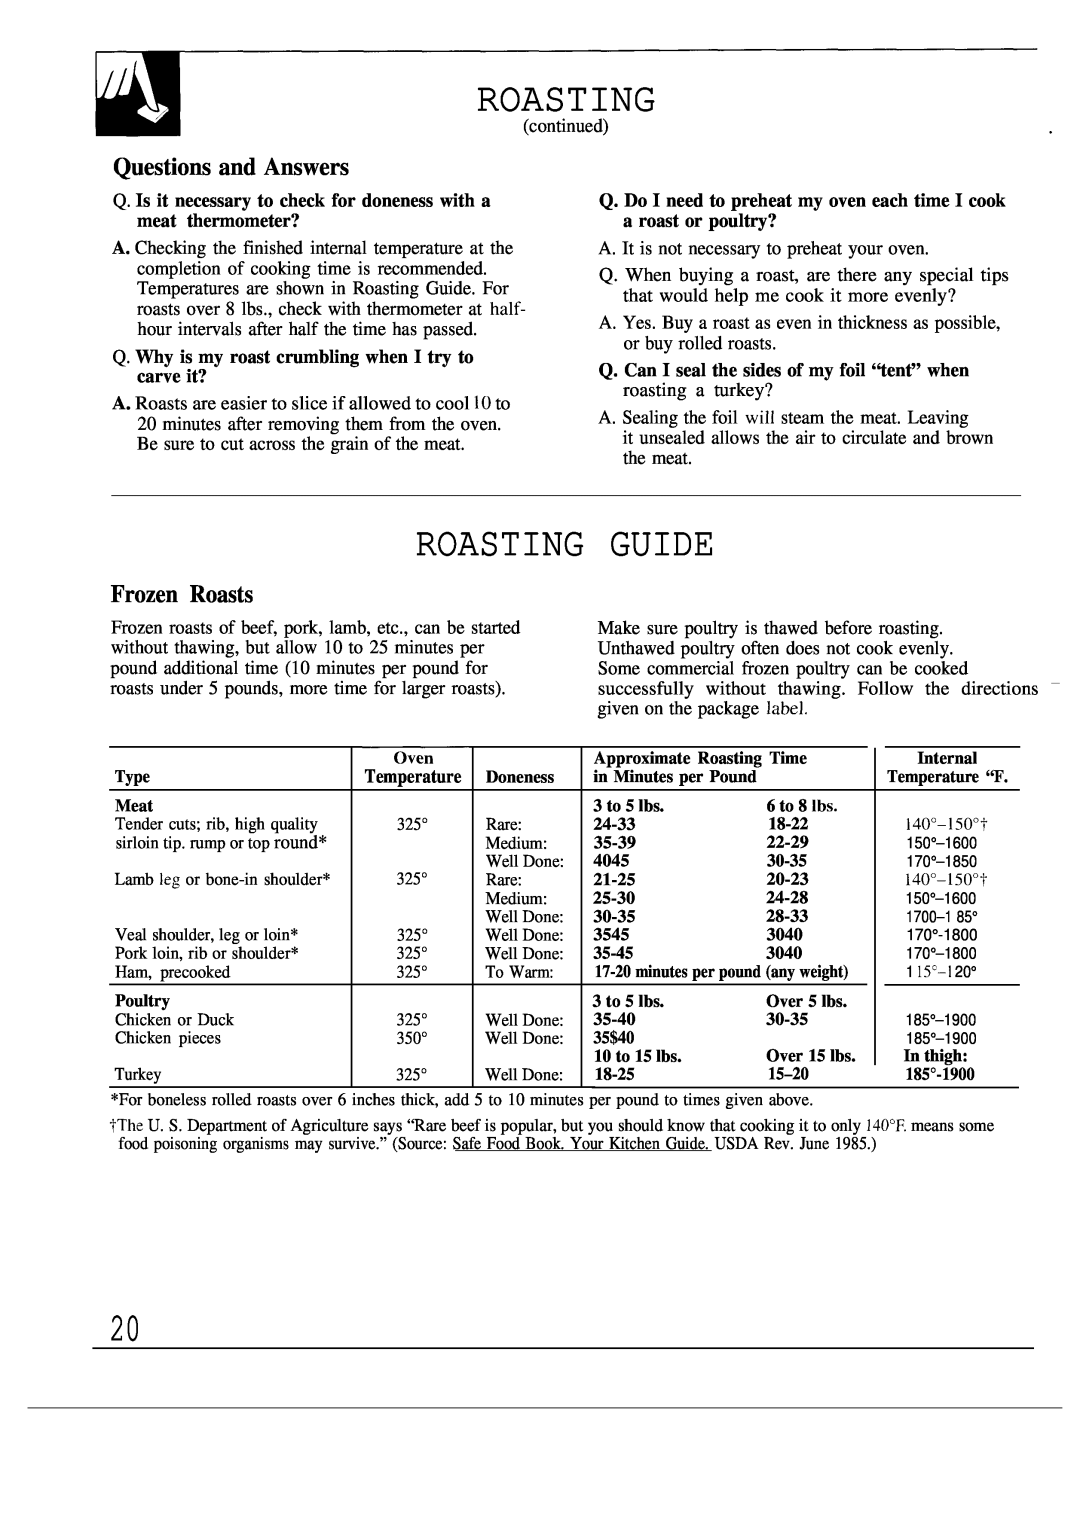 GE JGSP21 Roasting Guide, Questions and Answers, Frozen Roasts, Q. Why is my roast crumbling when I try to carve it? 